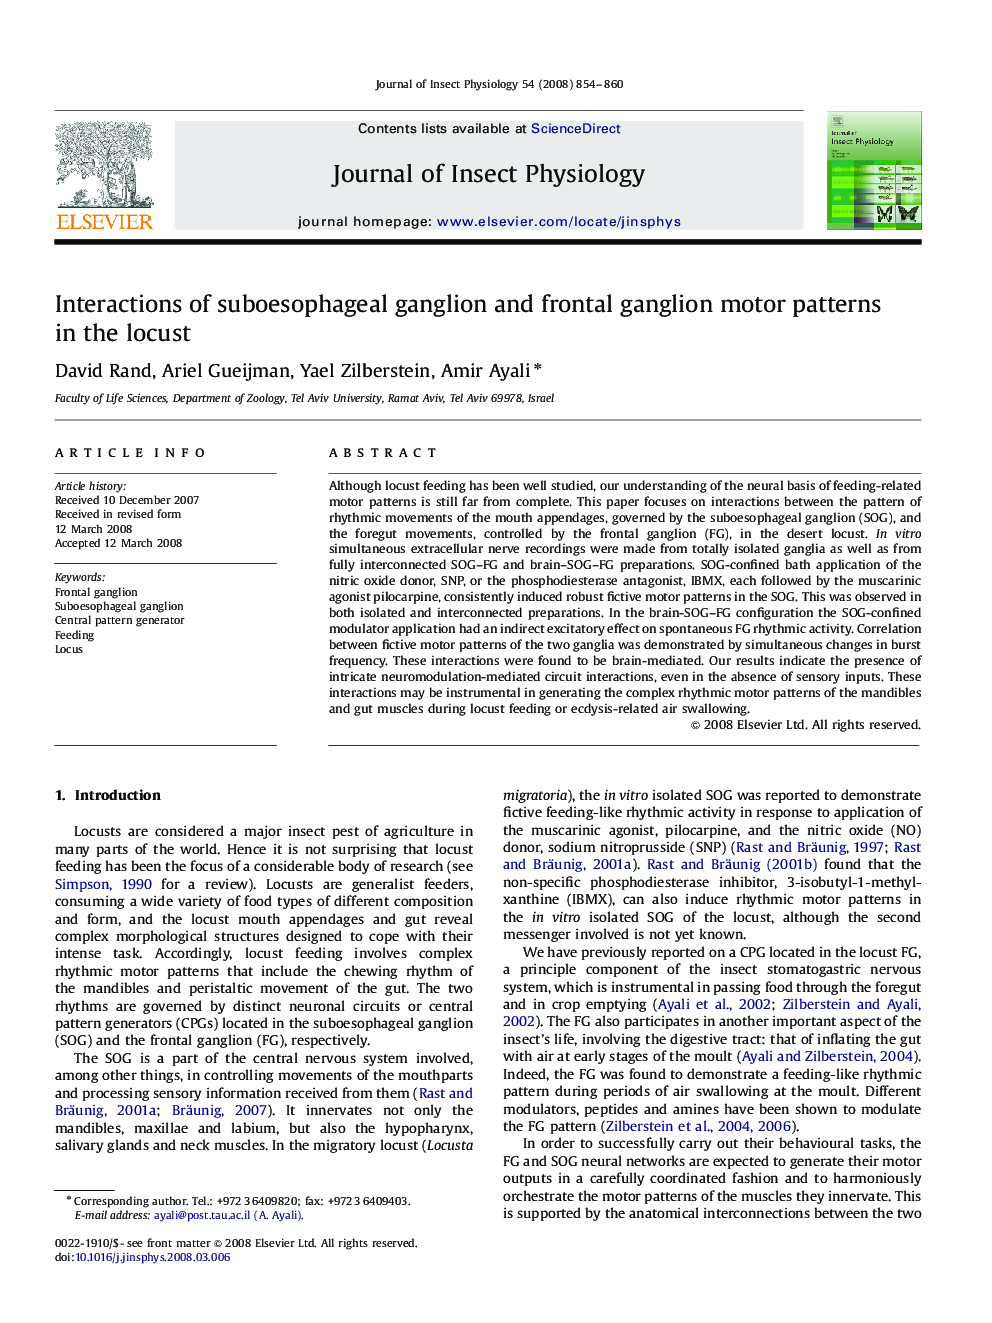 Interactions of suboesophageal ganglion and frontal ganglion motor patterns in the locust